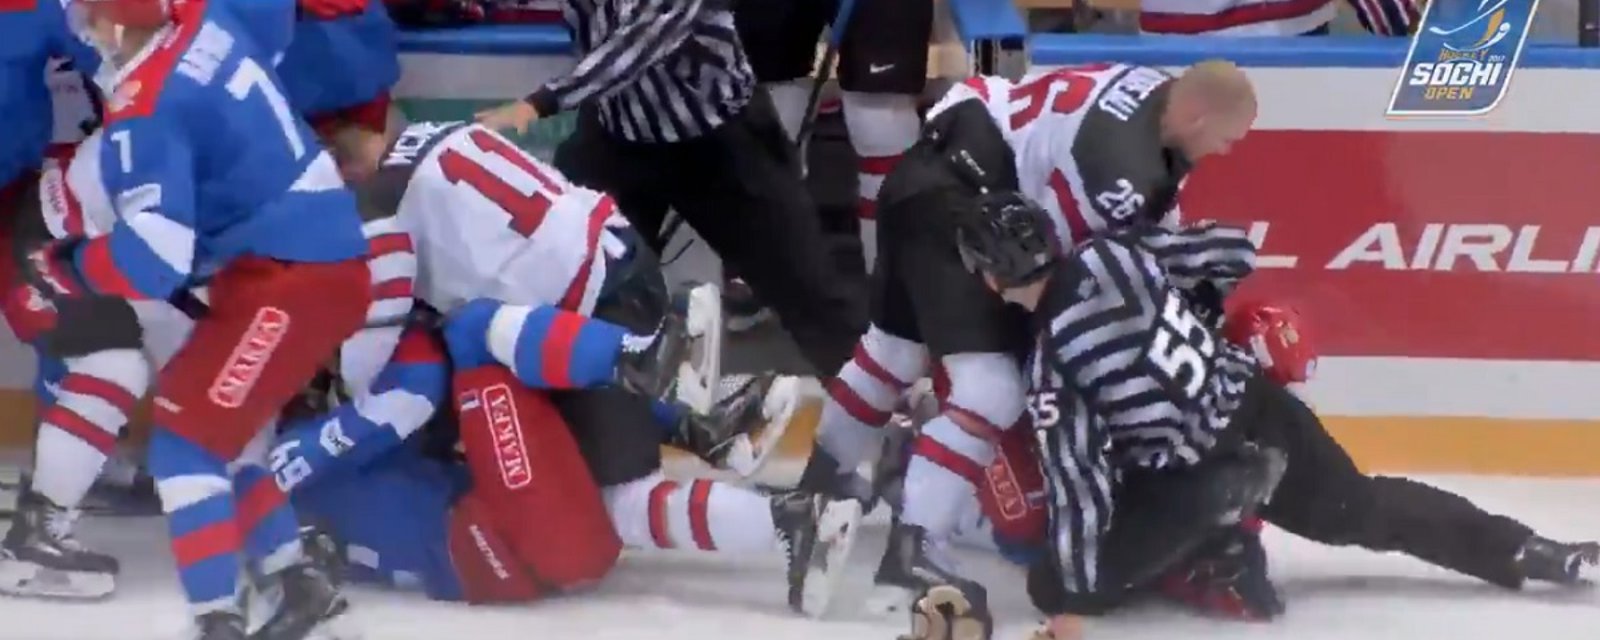 Breaking: Crazy brawl between Canada and Russia today!